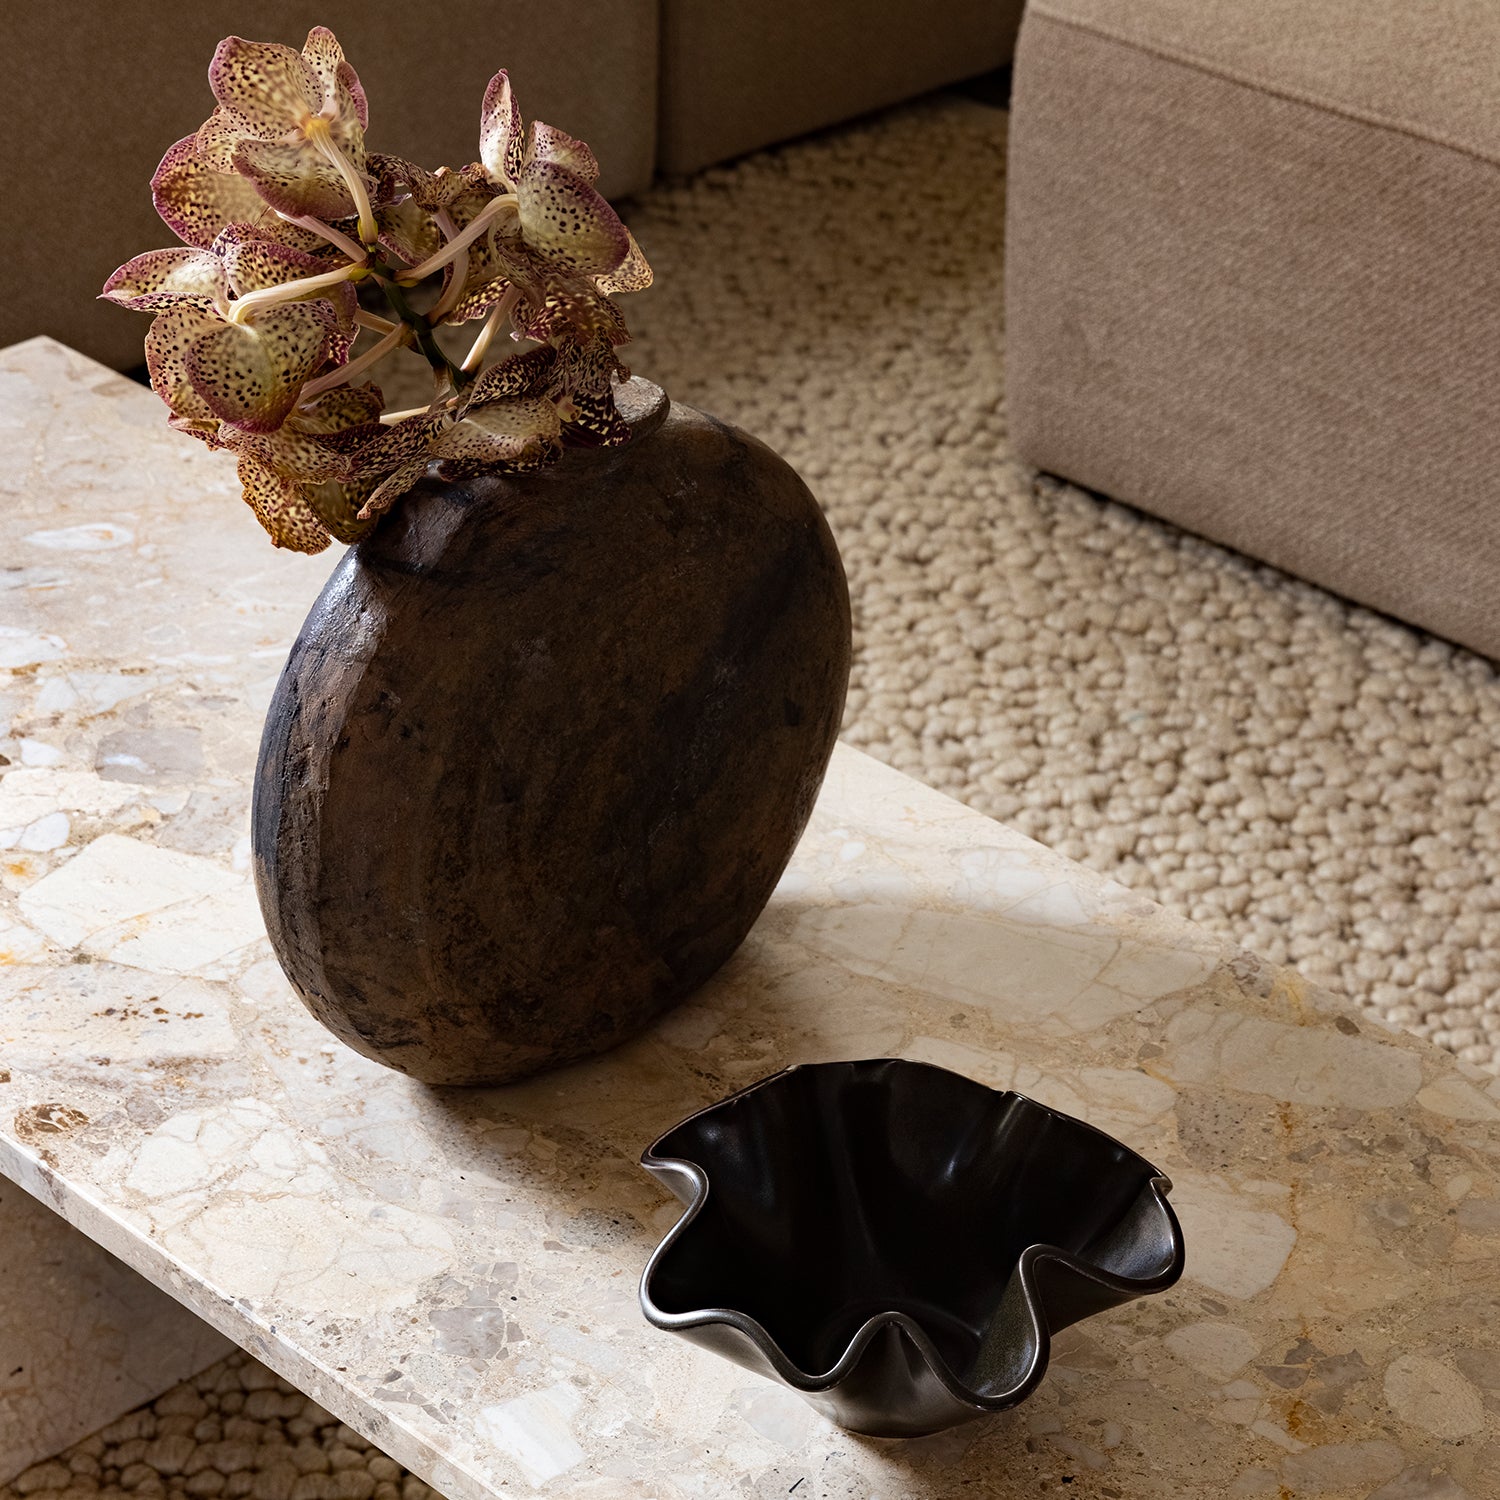 Androgyne Lounge Table Stone - The Design Choice